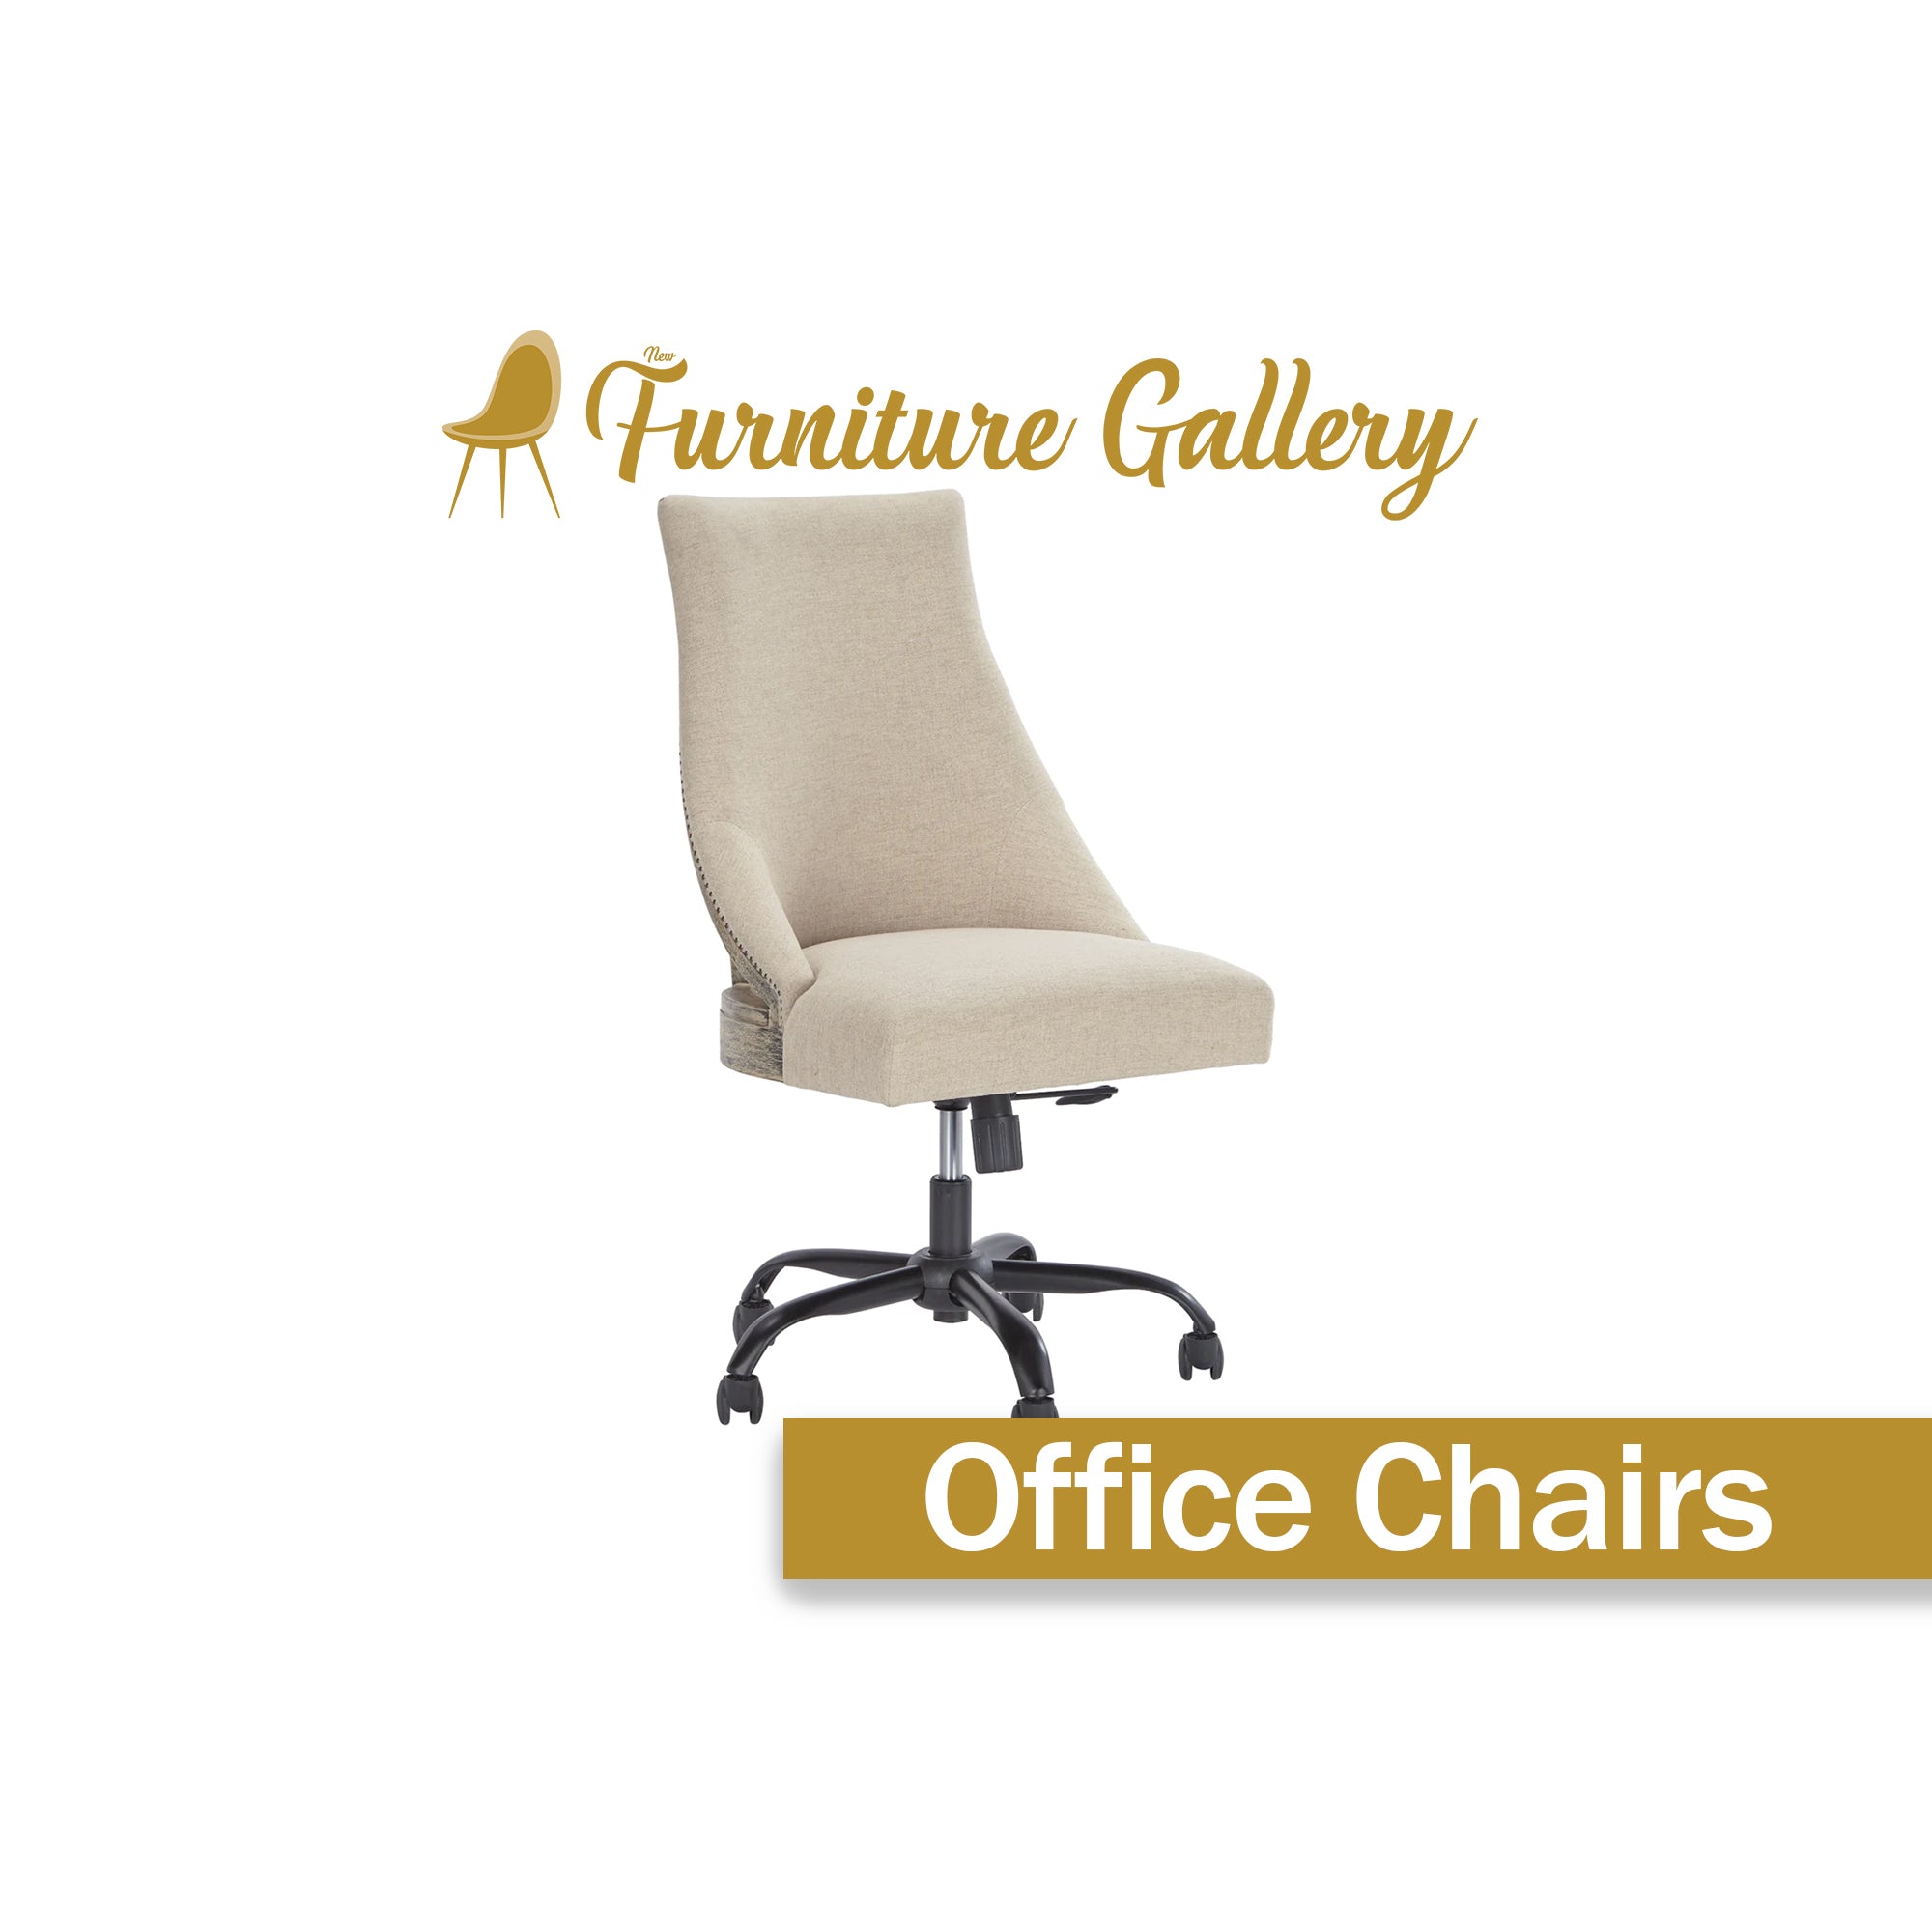 Office Chairs by New Furniture Gallery. This Image consists of office chair by Ashley 